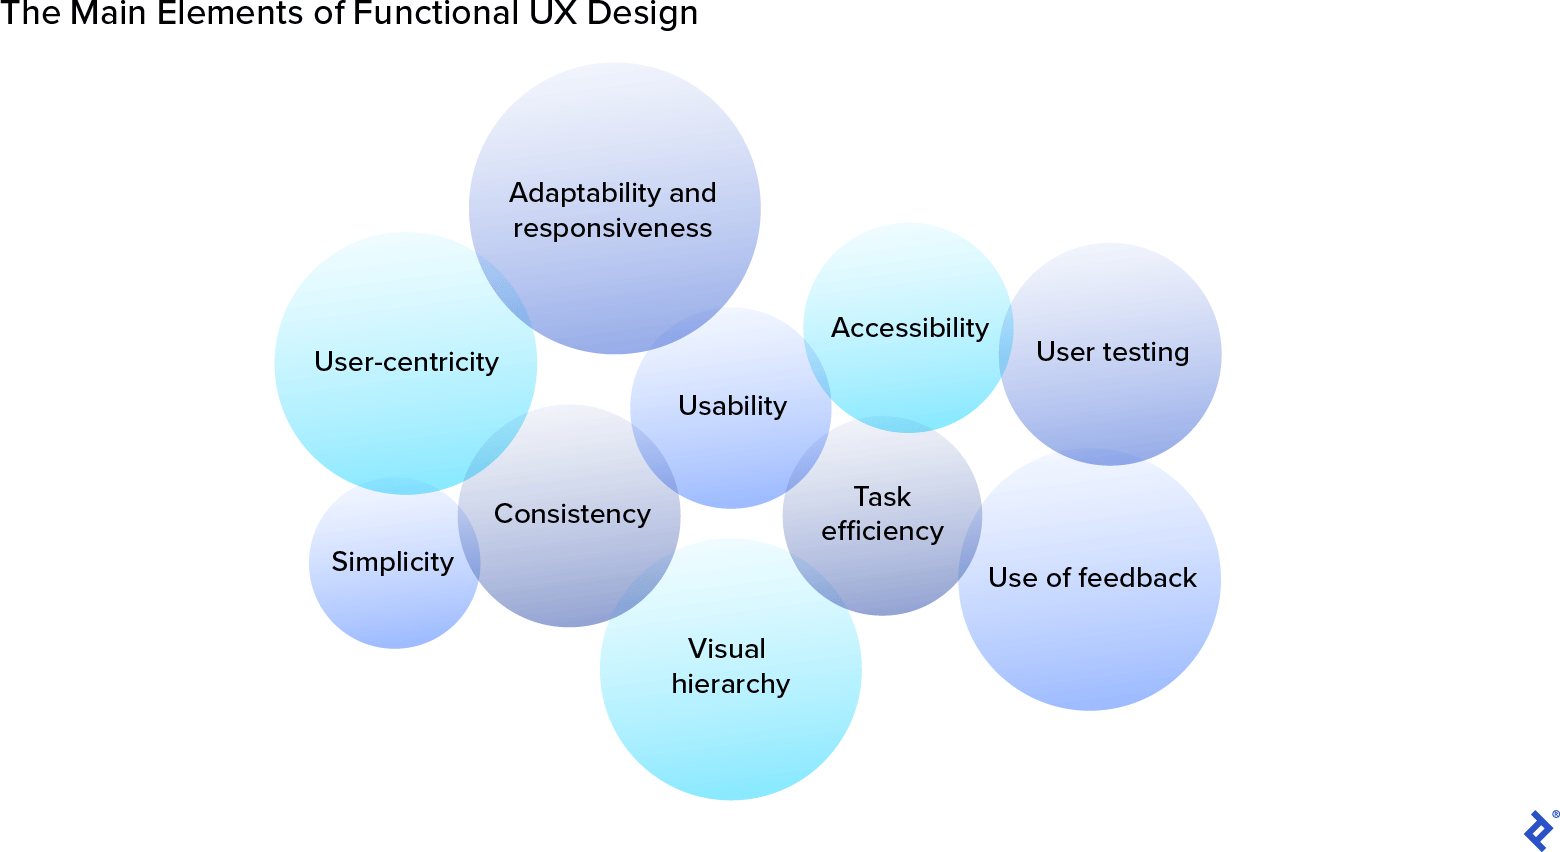 The main elements of functional UX design include  consistency, simplicity, task efficiency, visual hierarchy, and others.